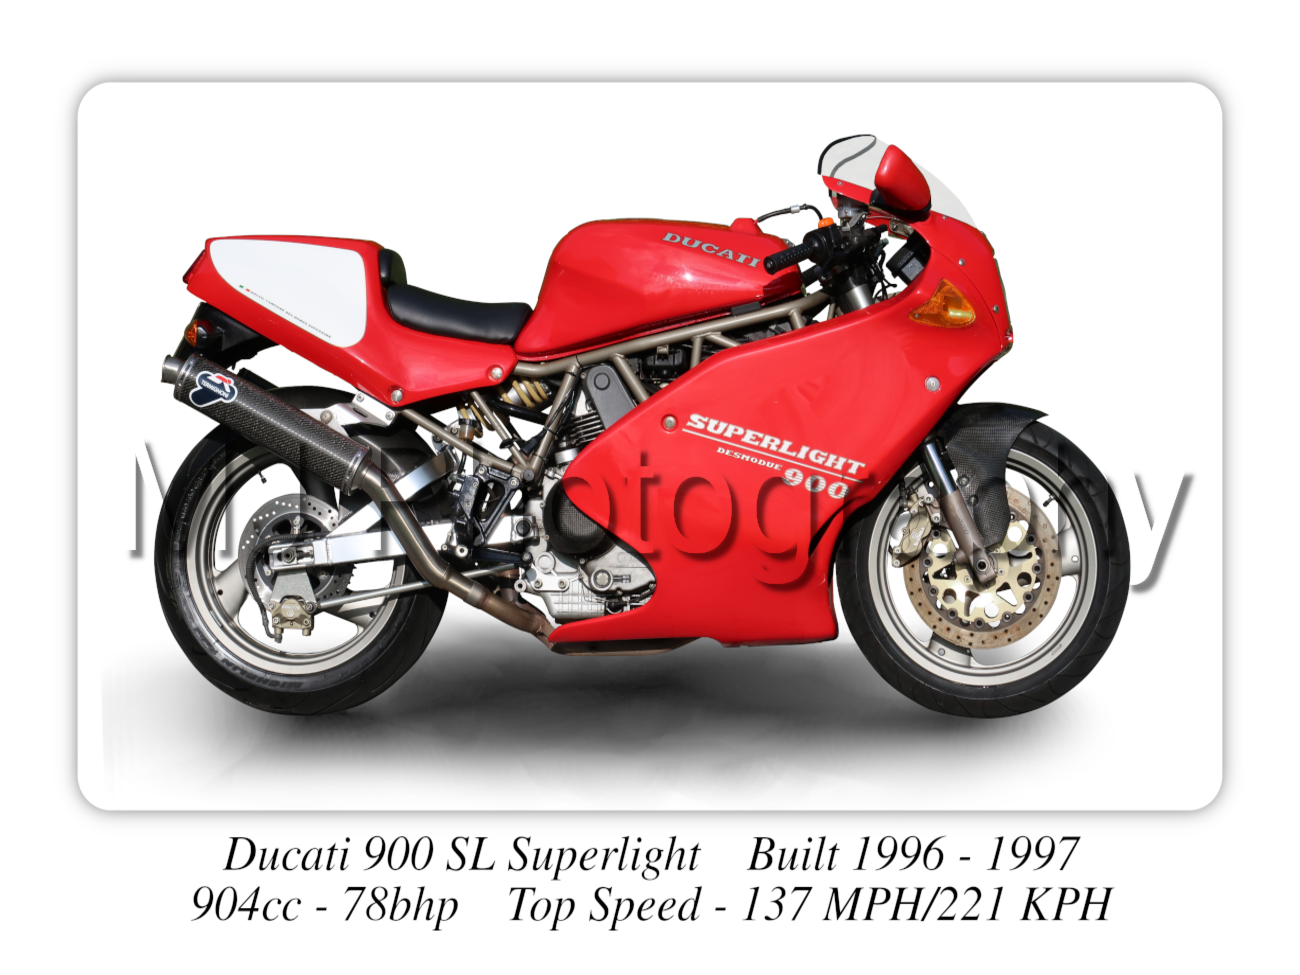 Ducati 900 SL Superlight Classic Motorcycle - A3/A4 Size Print Poster